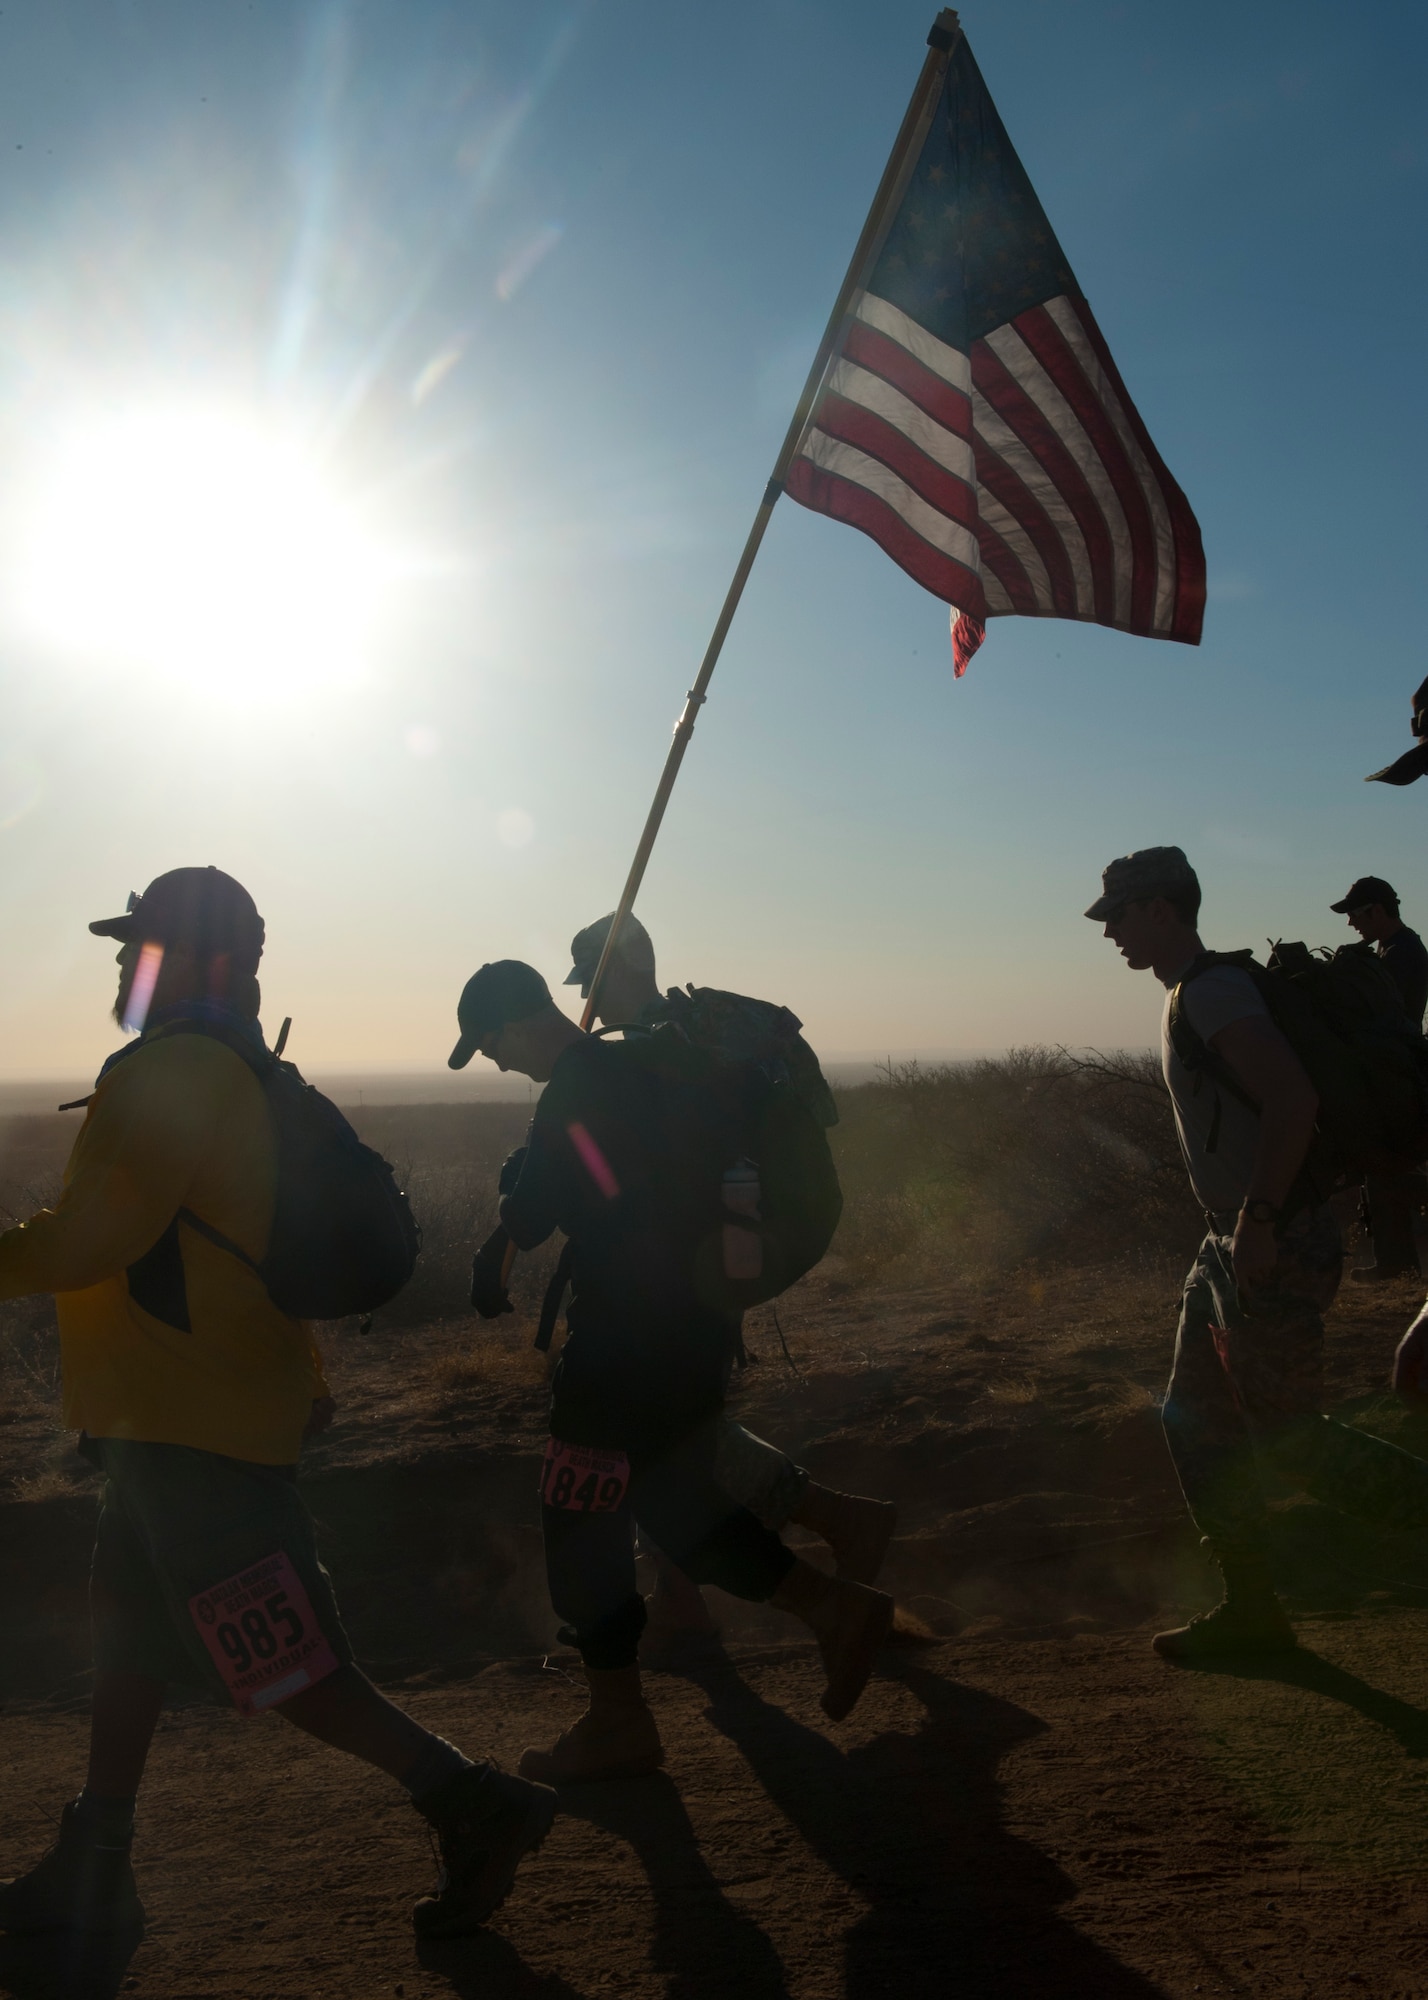 Participants in the 24th annual Bataan Memorial Death March carry an American flag after the start of the event at White Sands Missile Range, N.M., March 17. Over 5,800 people came to honor more than 76,000 Prisoners Of War/Missing In Action from Bataan and Corregidor during World War ll. The 26.2-mile course starts on WSMR, enters hilly terrain and finishes through sandy desert trails, with elevation ranging from 4,100-5,300 feet. This year 13 veterans from World War ll attended the event. (U.S. Air Force photo by Airman Leah Murray/Released)